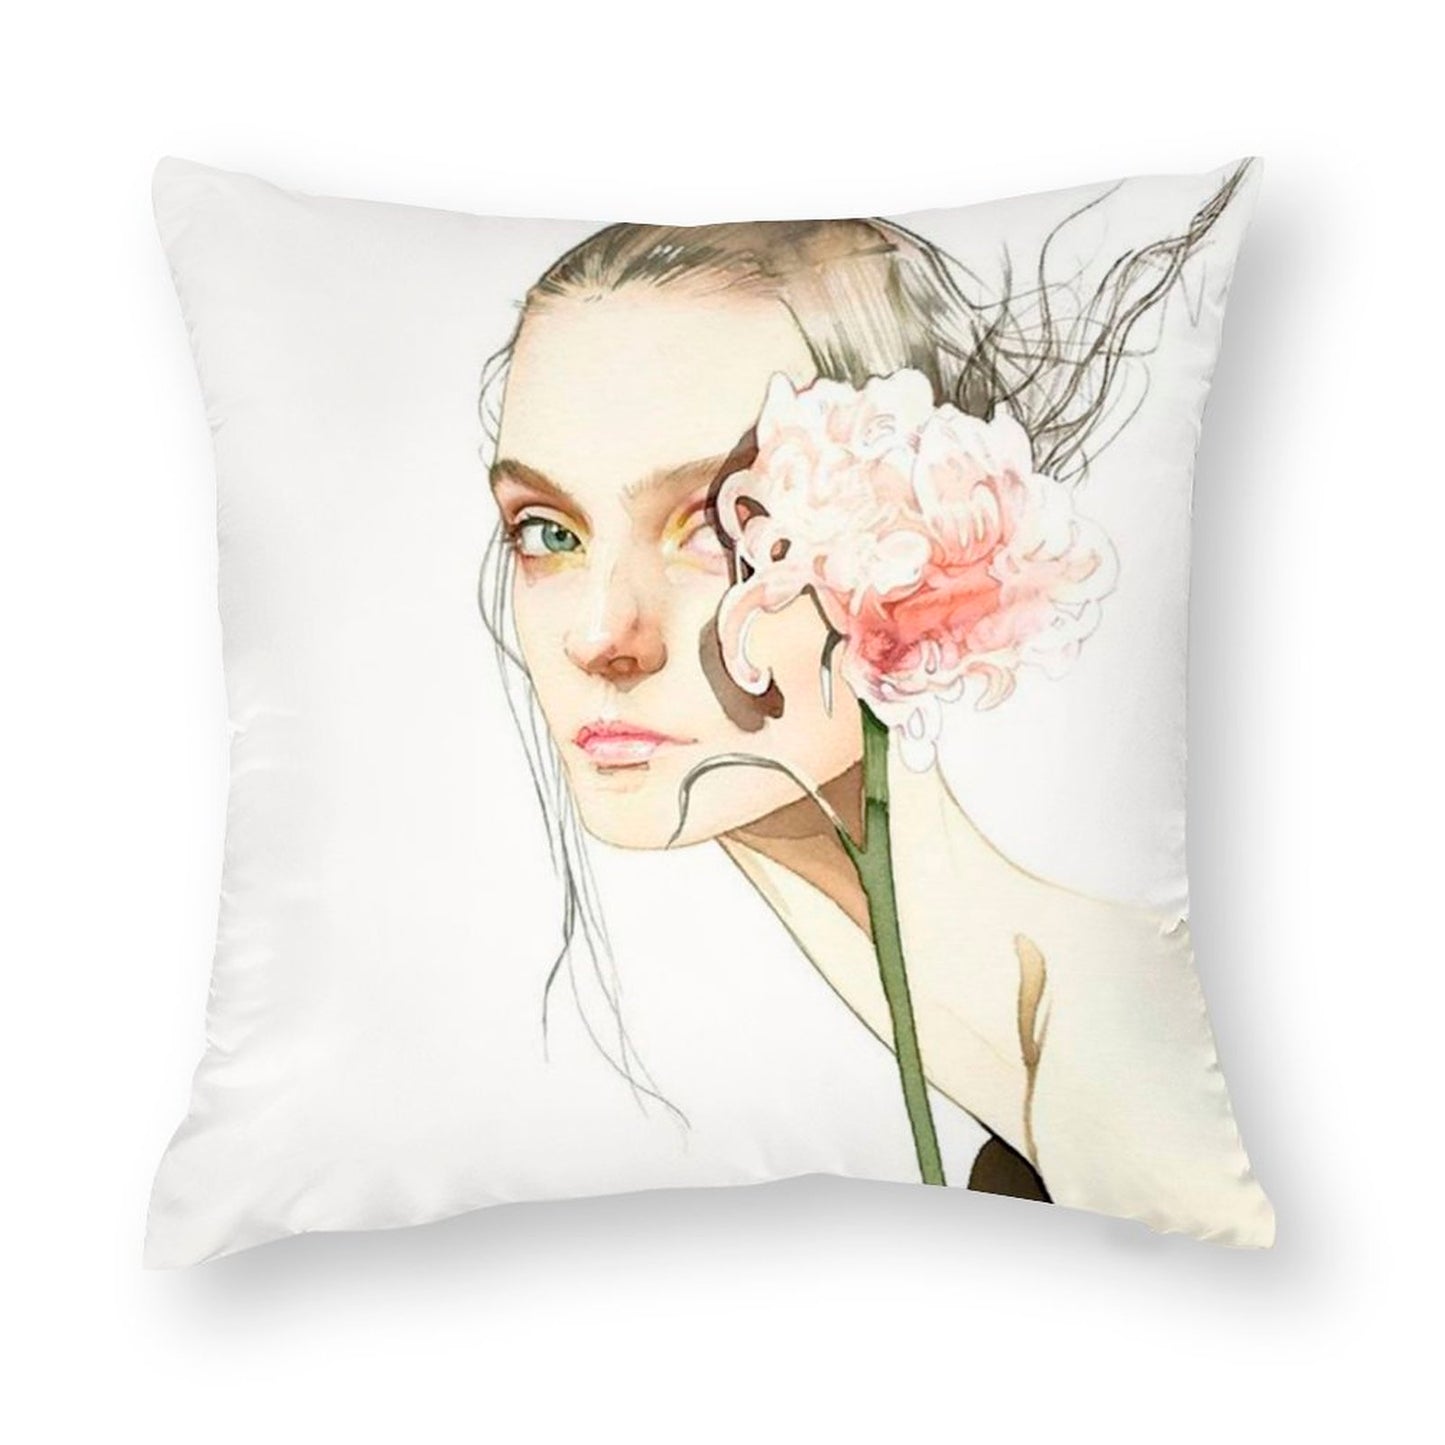 Online DIY Polyester Pillow Case Double-sided Printing Only Pillowcase